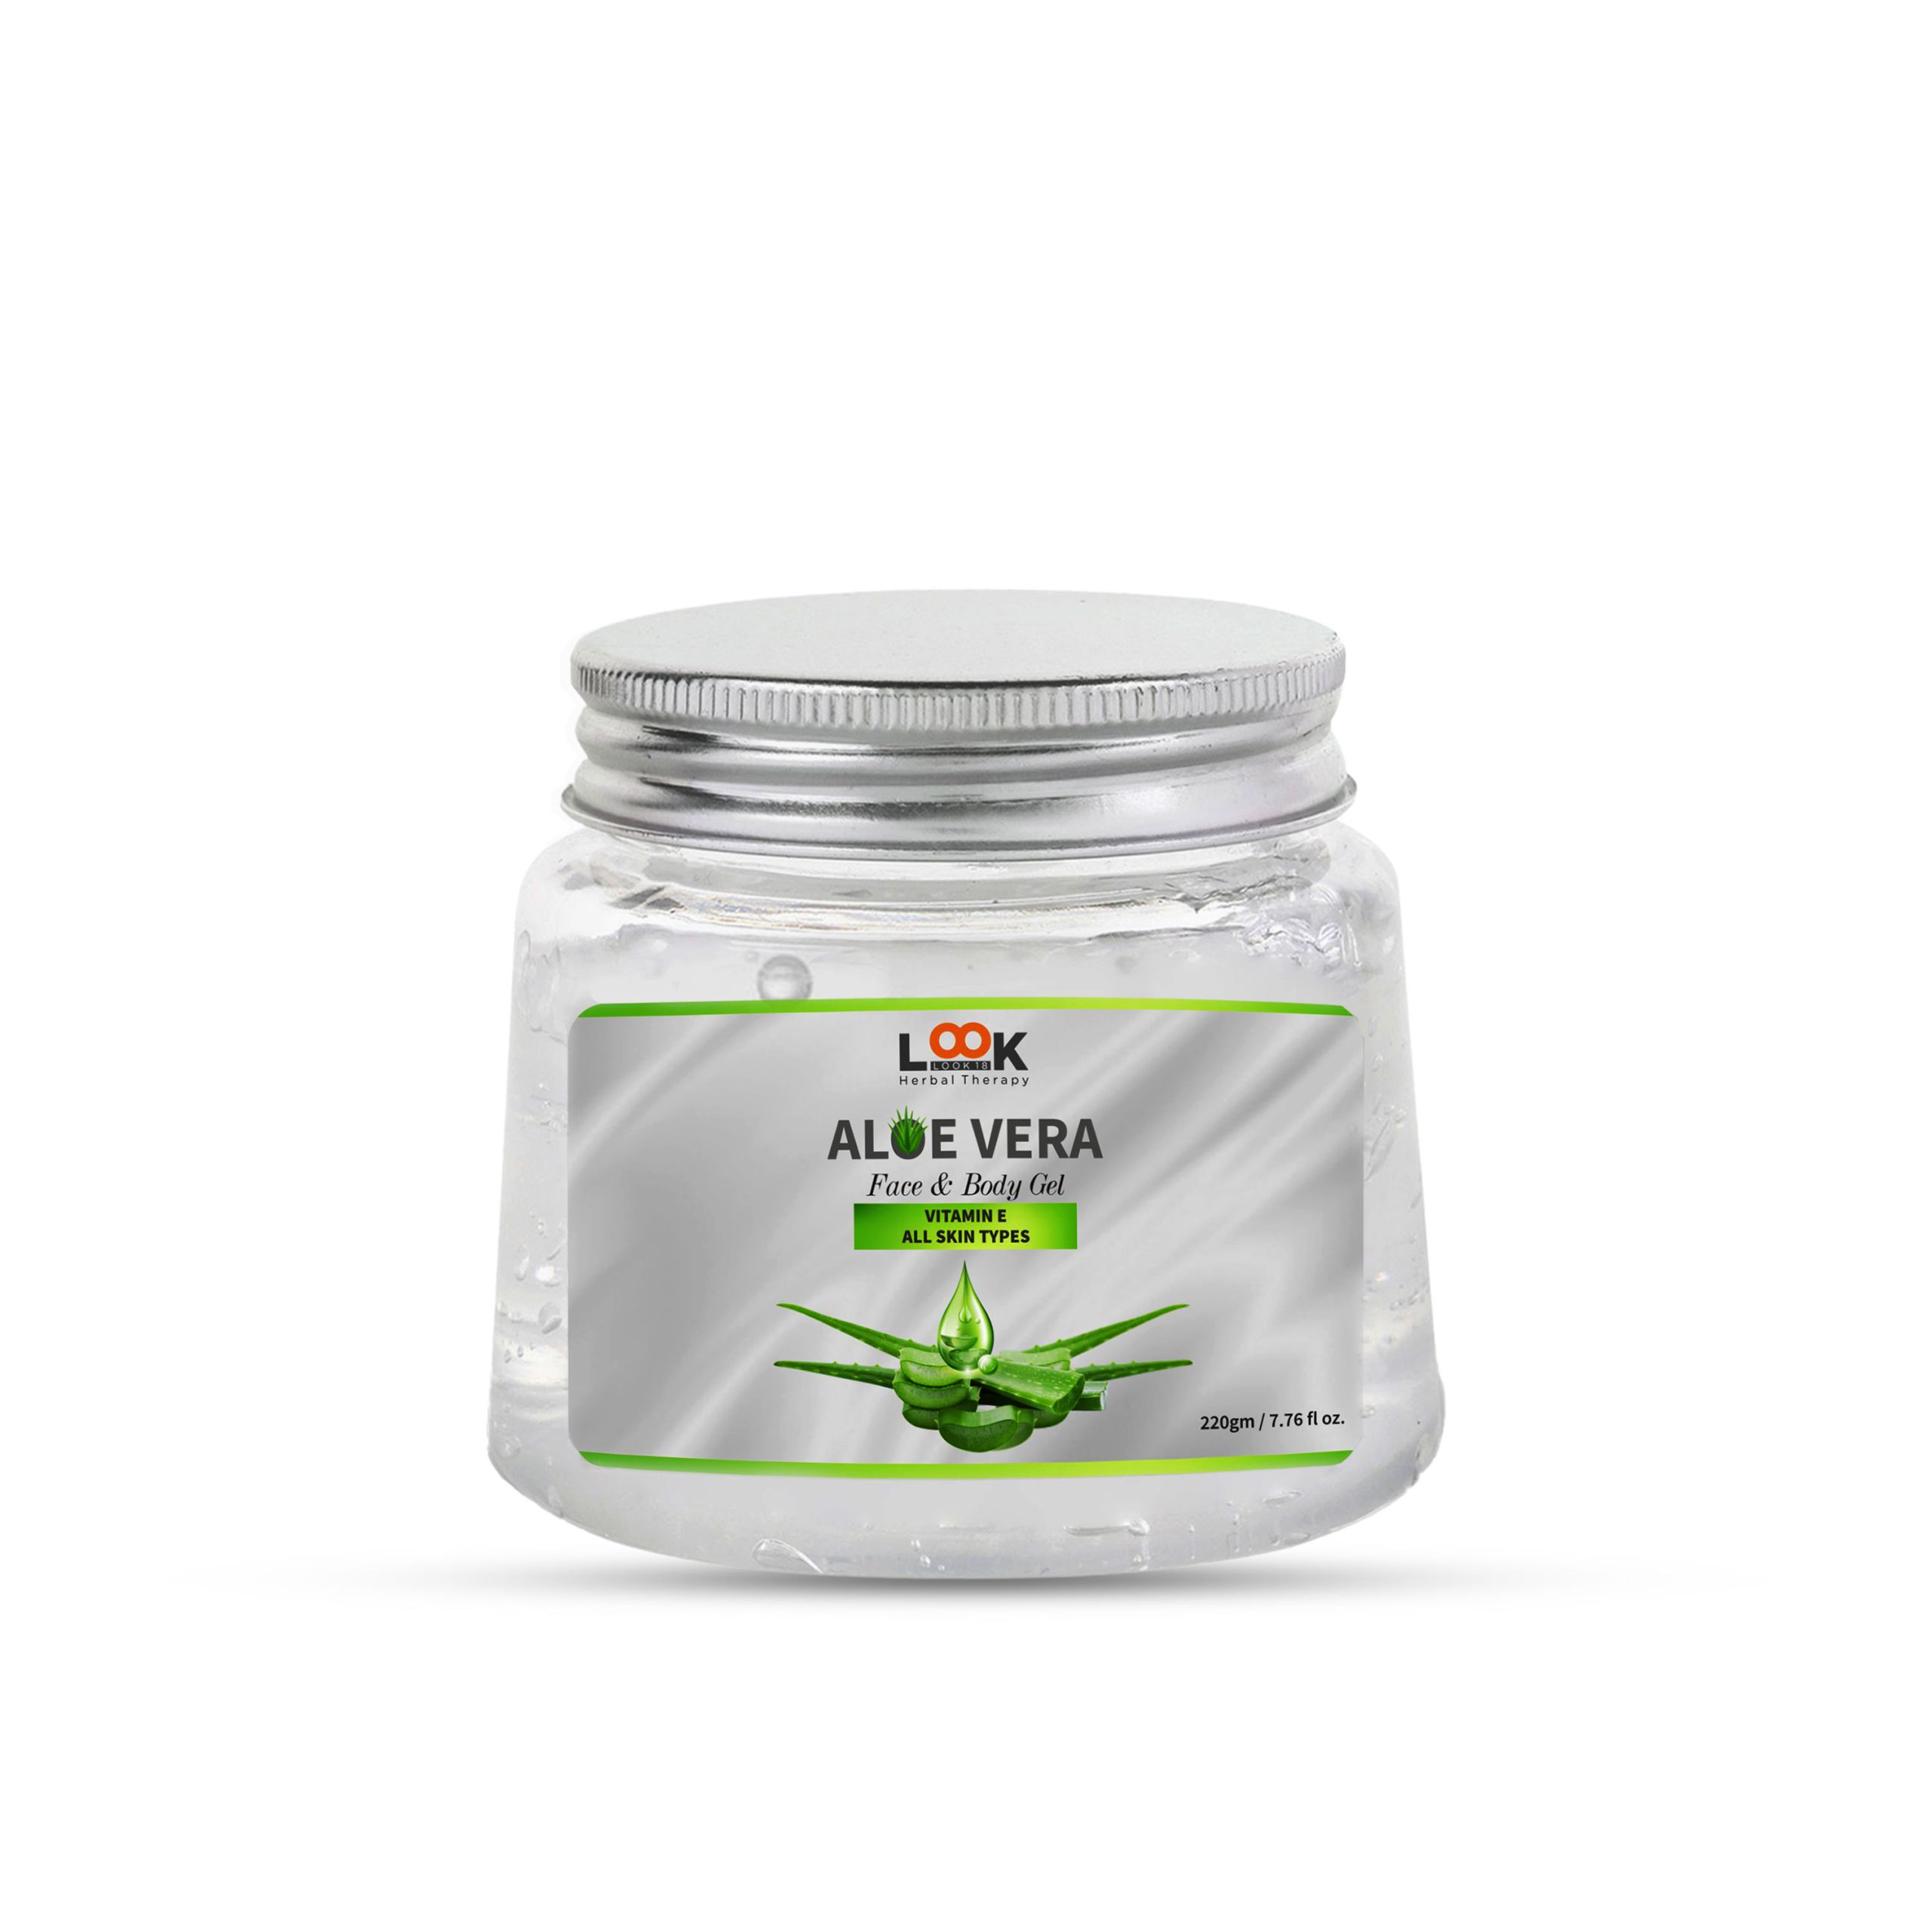 Look 18 AloeVera Face and Body Gel – 220gm